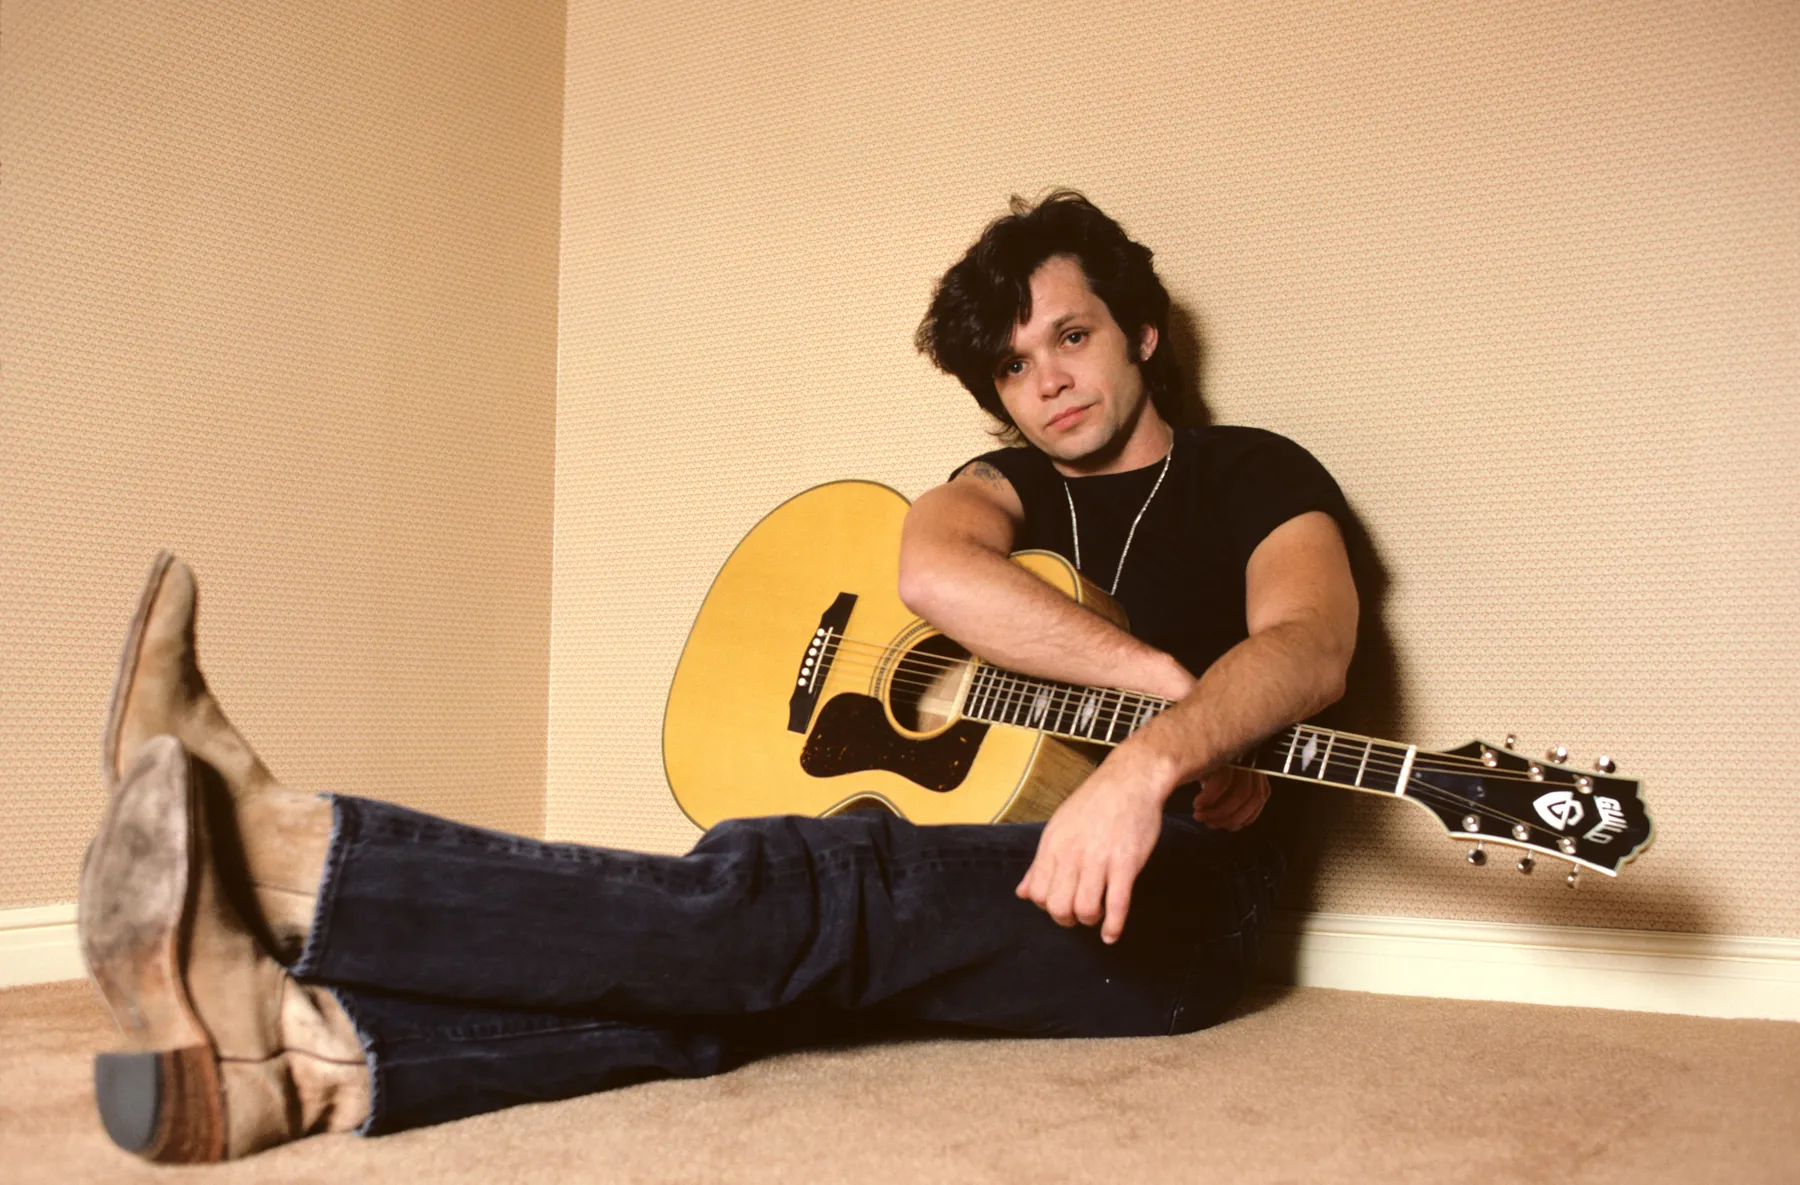 John Mellencamp in his younger days